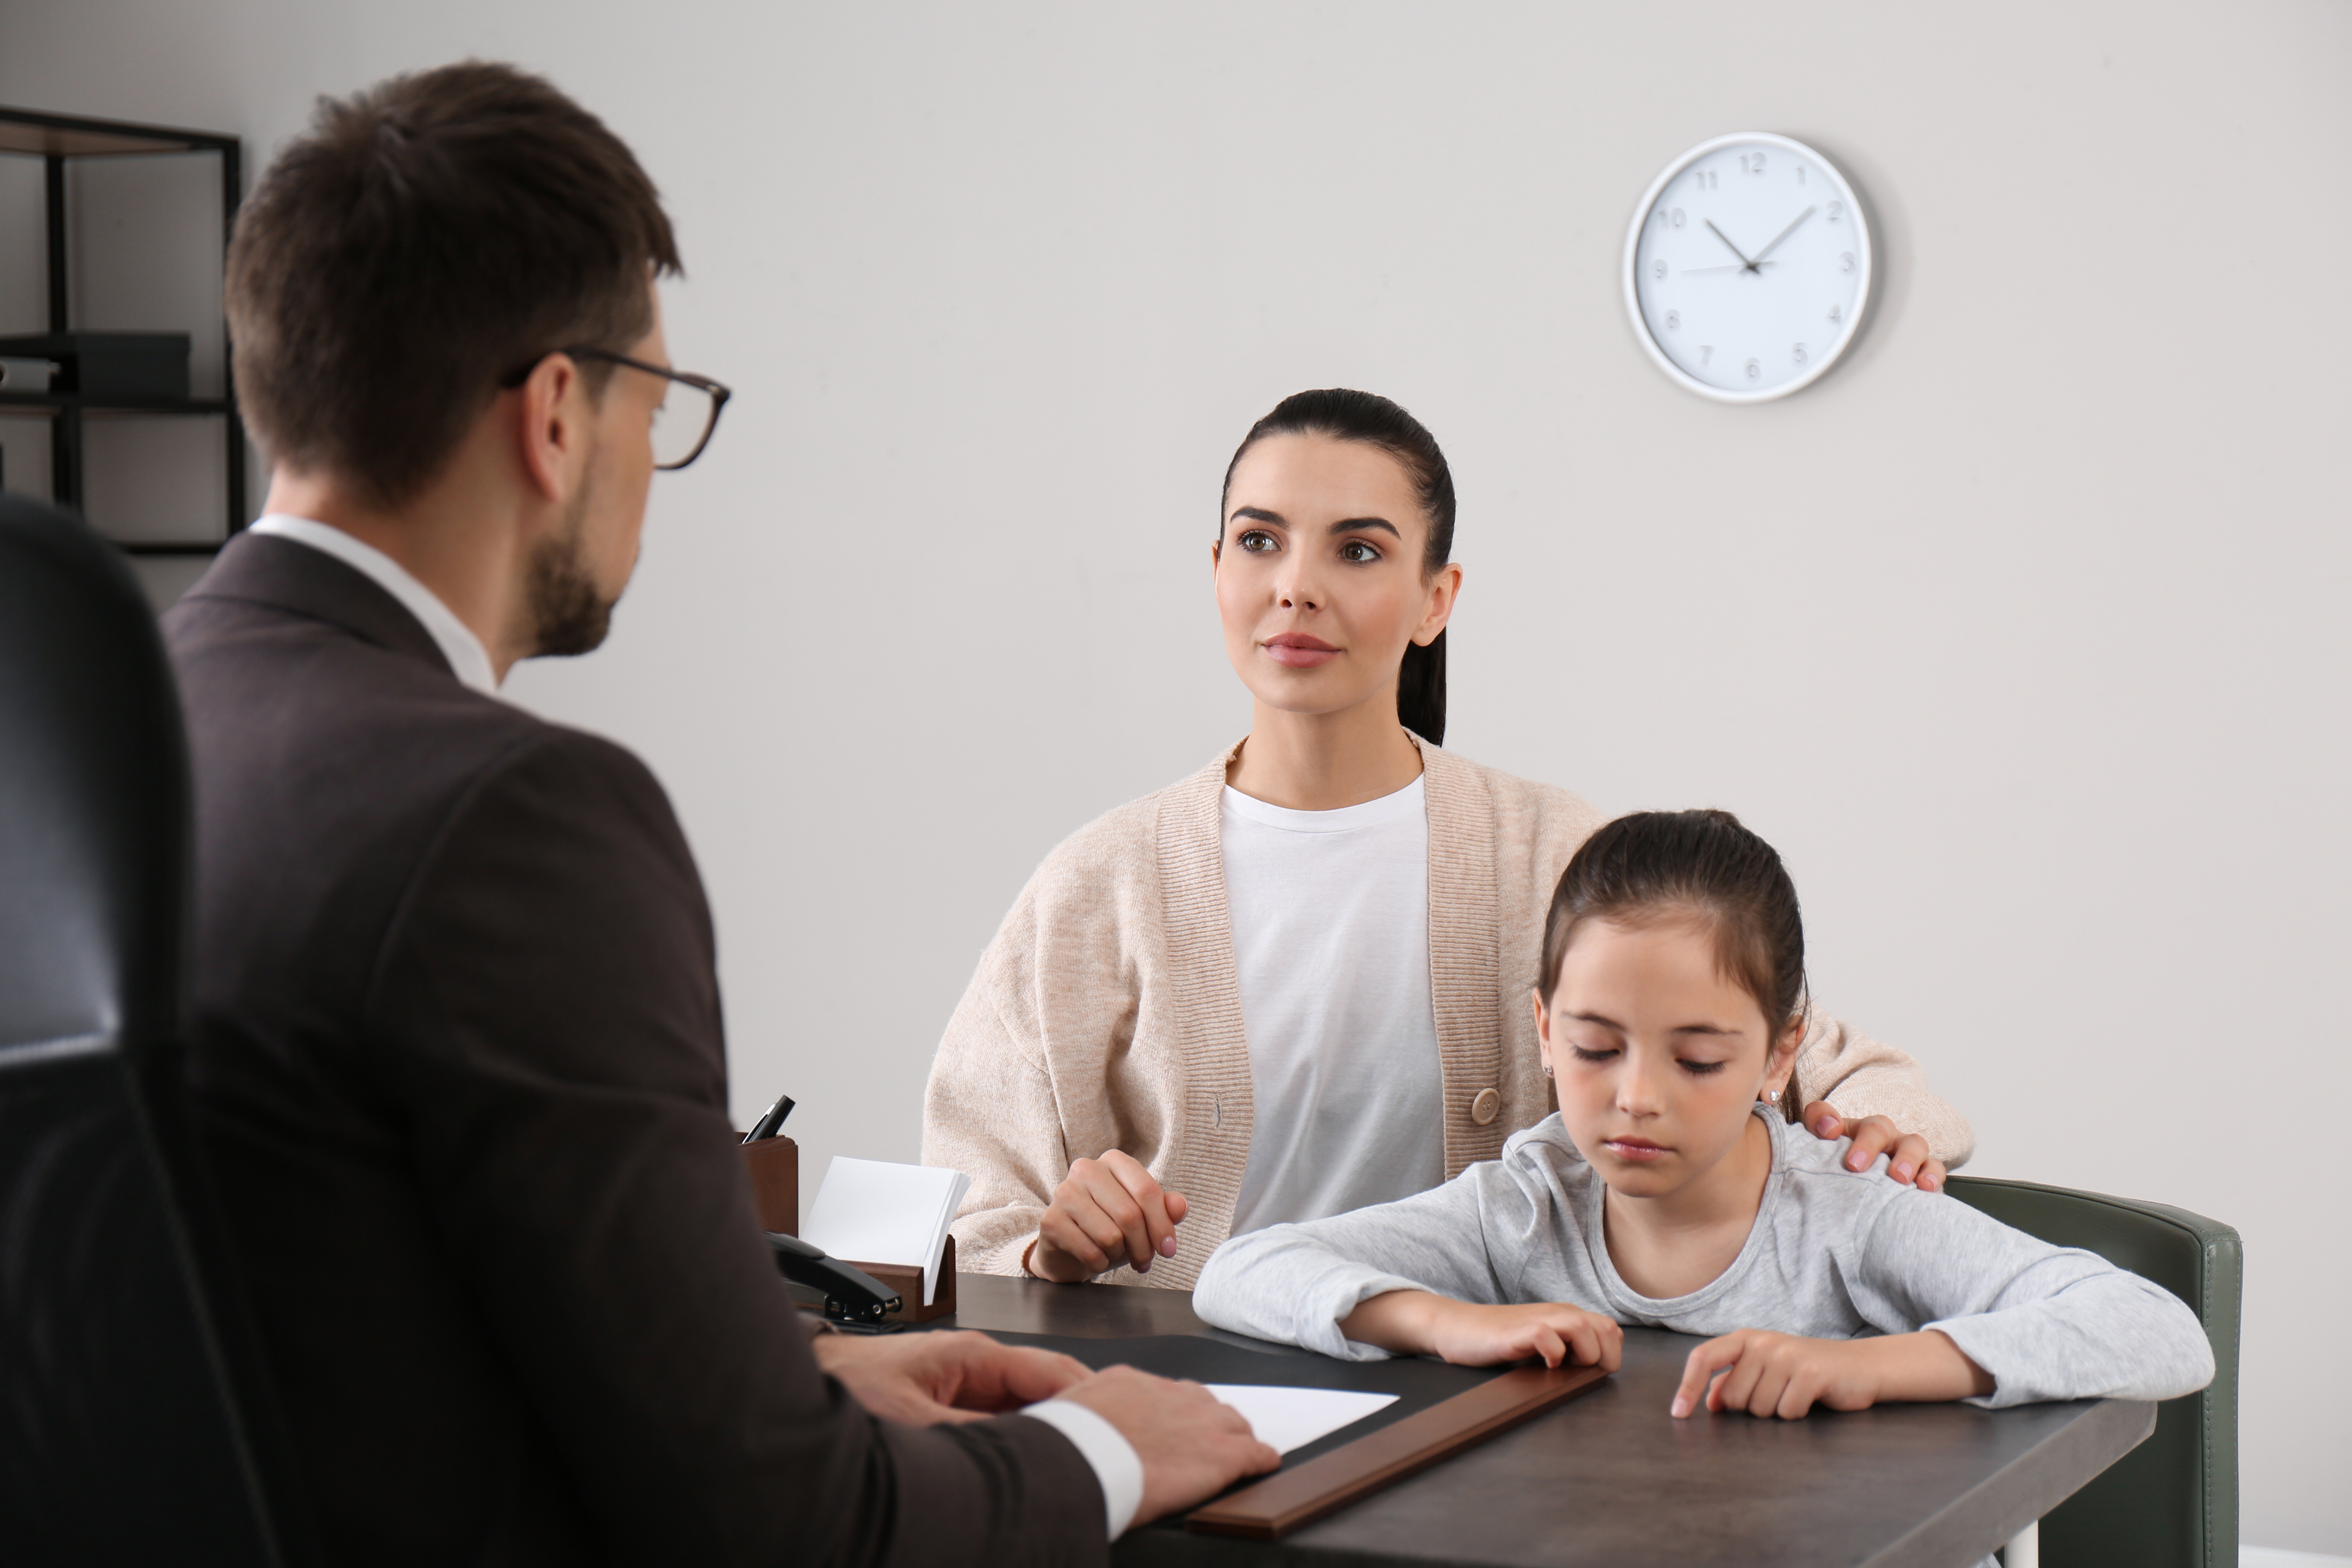 A mother and daughter having a meeting with the school principal | Source: Shutterstock